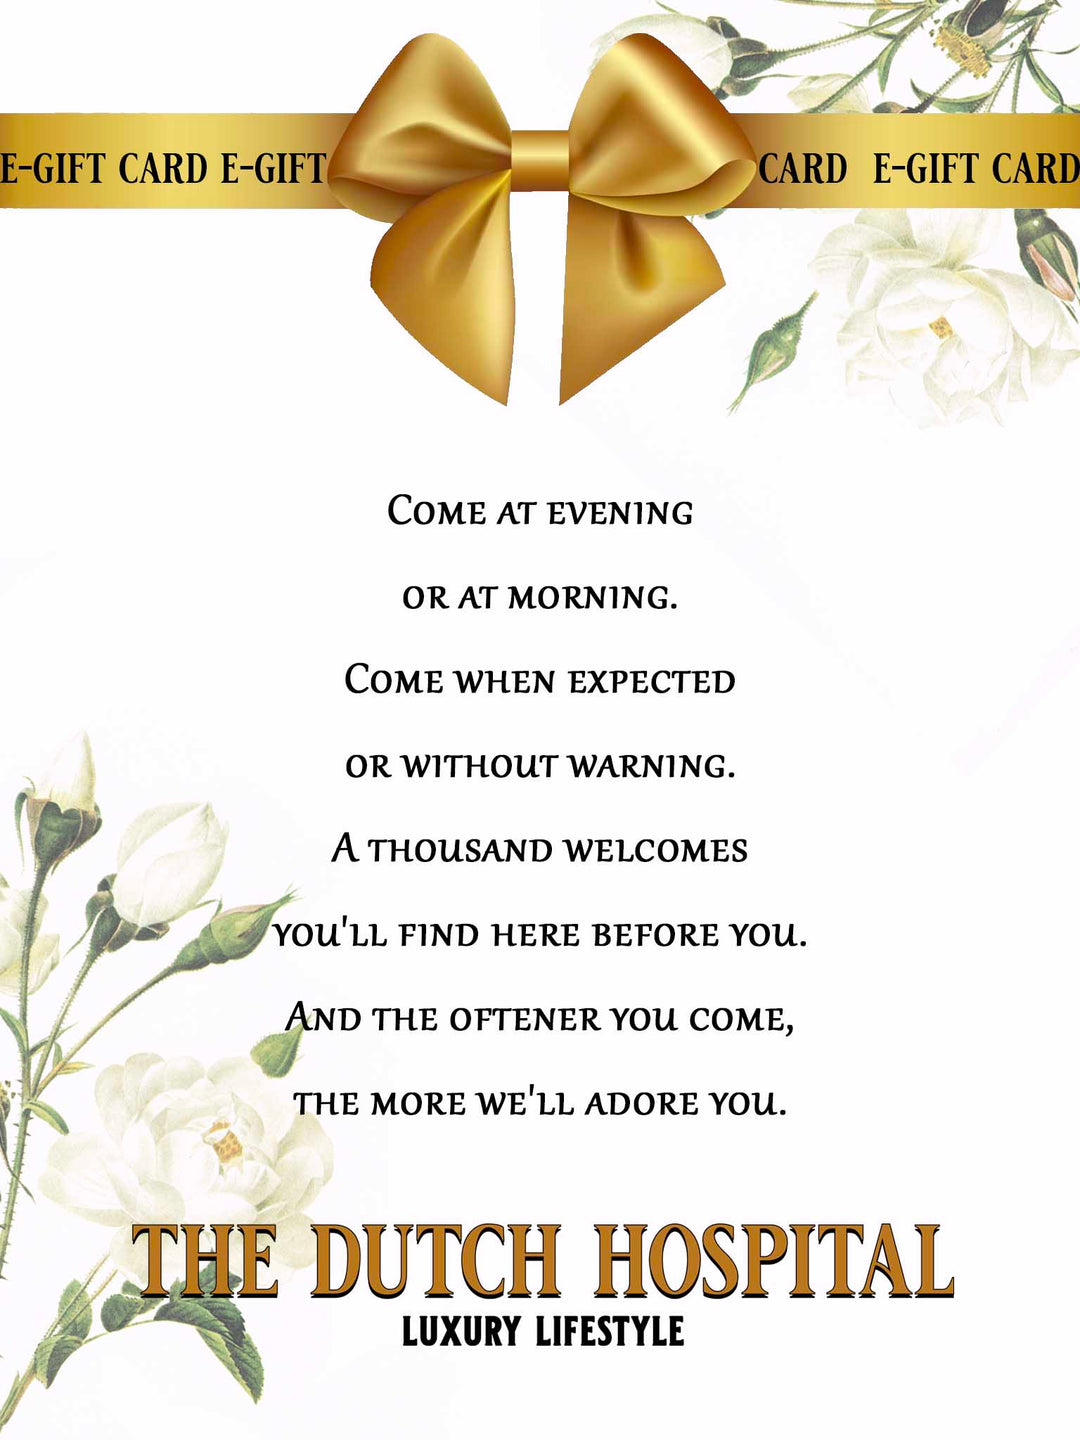 Gift For All E-Gift Card, The Dutch Hospital Luxury Lifestyle e-gift card